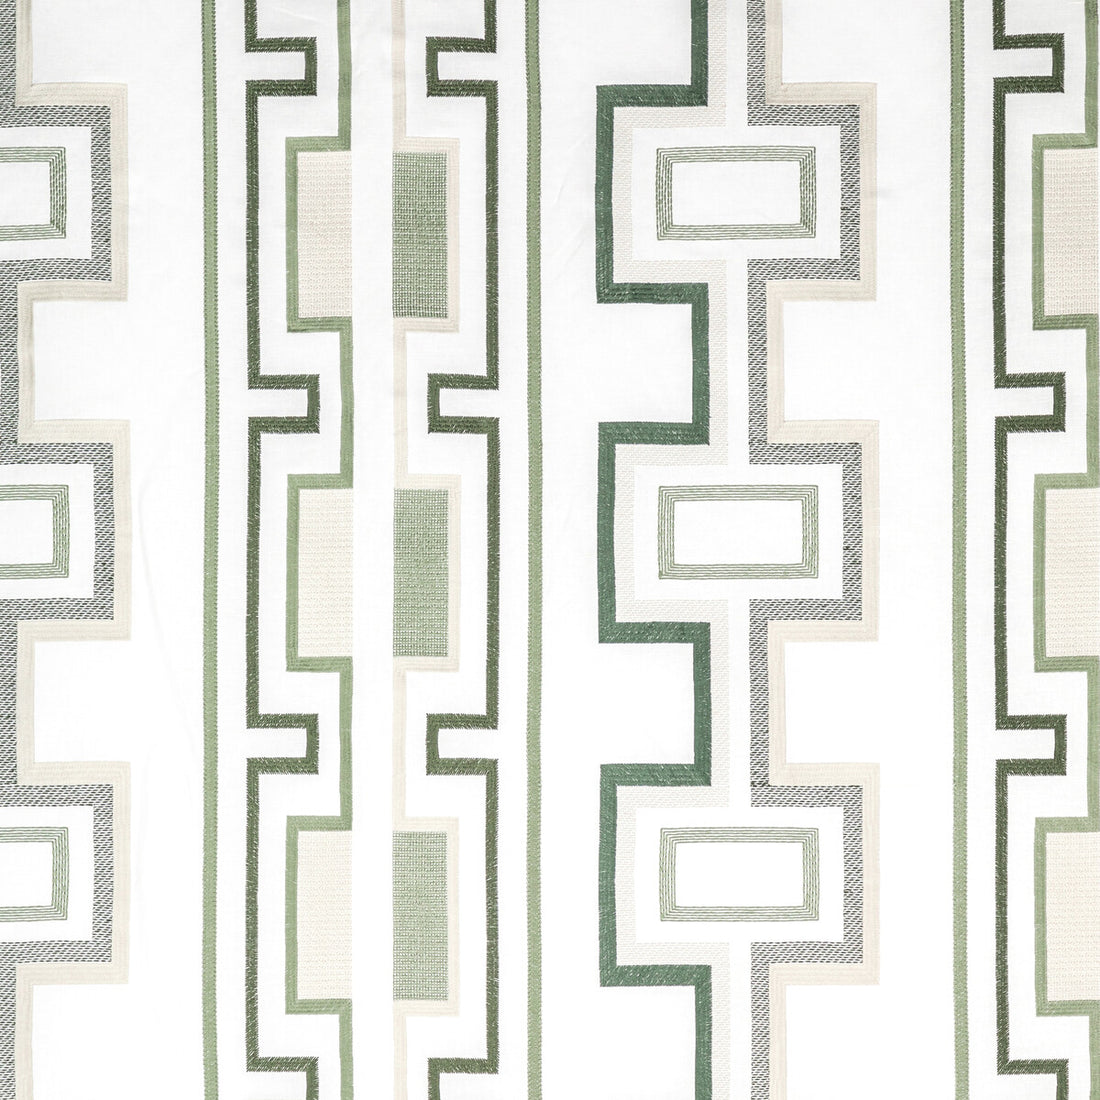 Tritone Embroidery fabric in sage color - pattern GWF-3779.30.0 - by Lee Jofa Modern in the Rhapsody collection